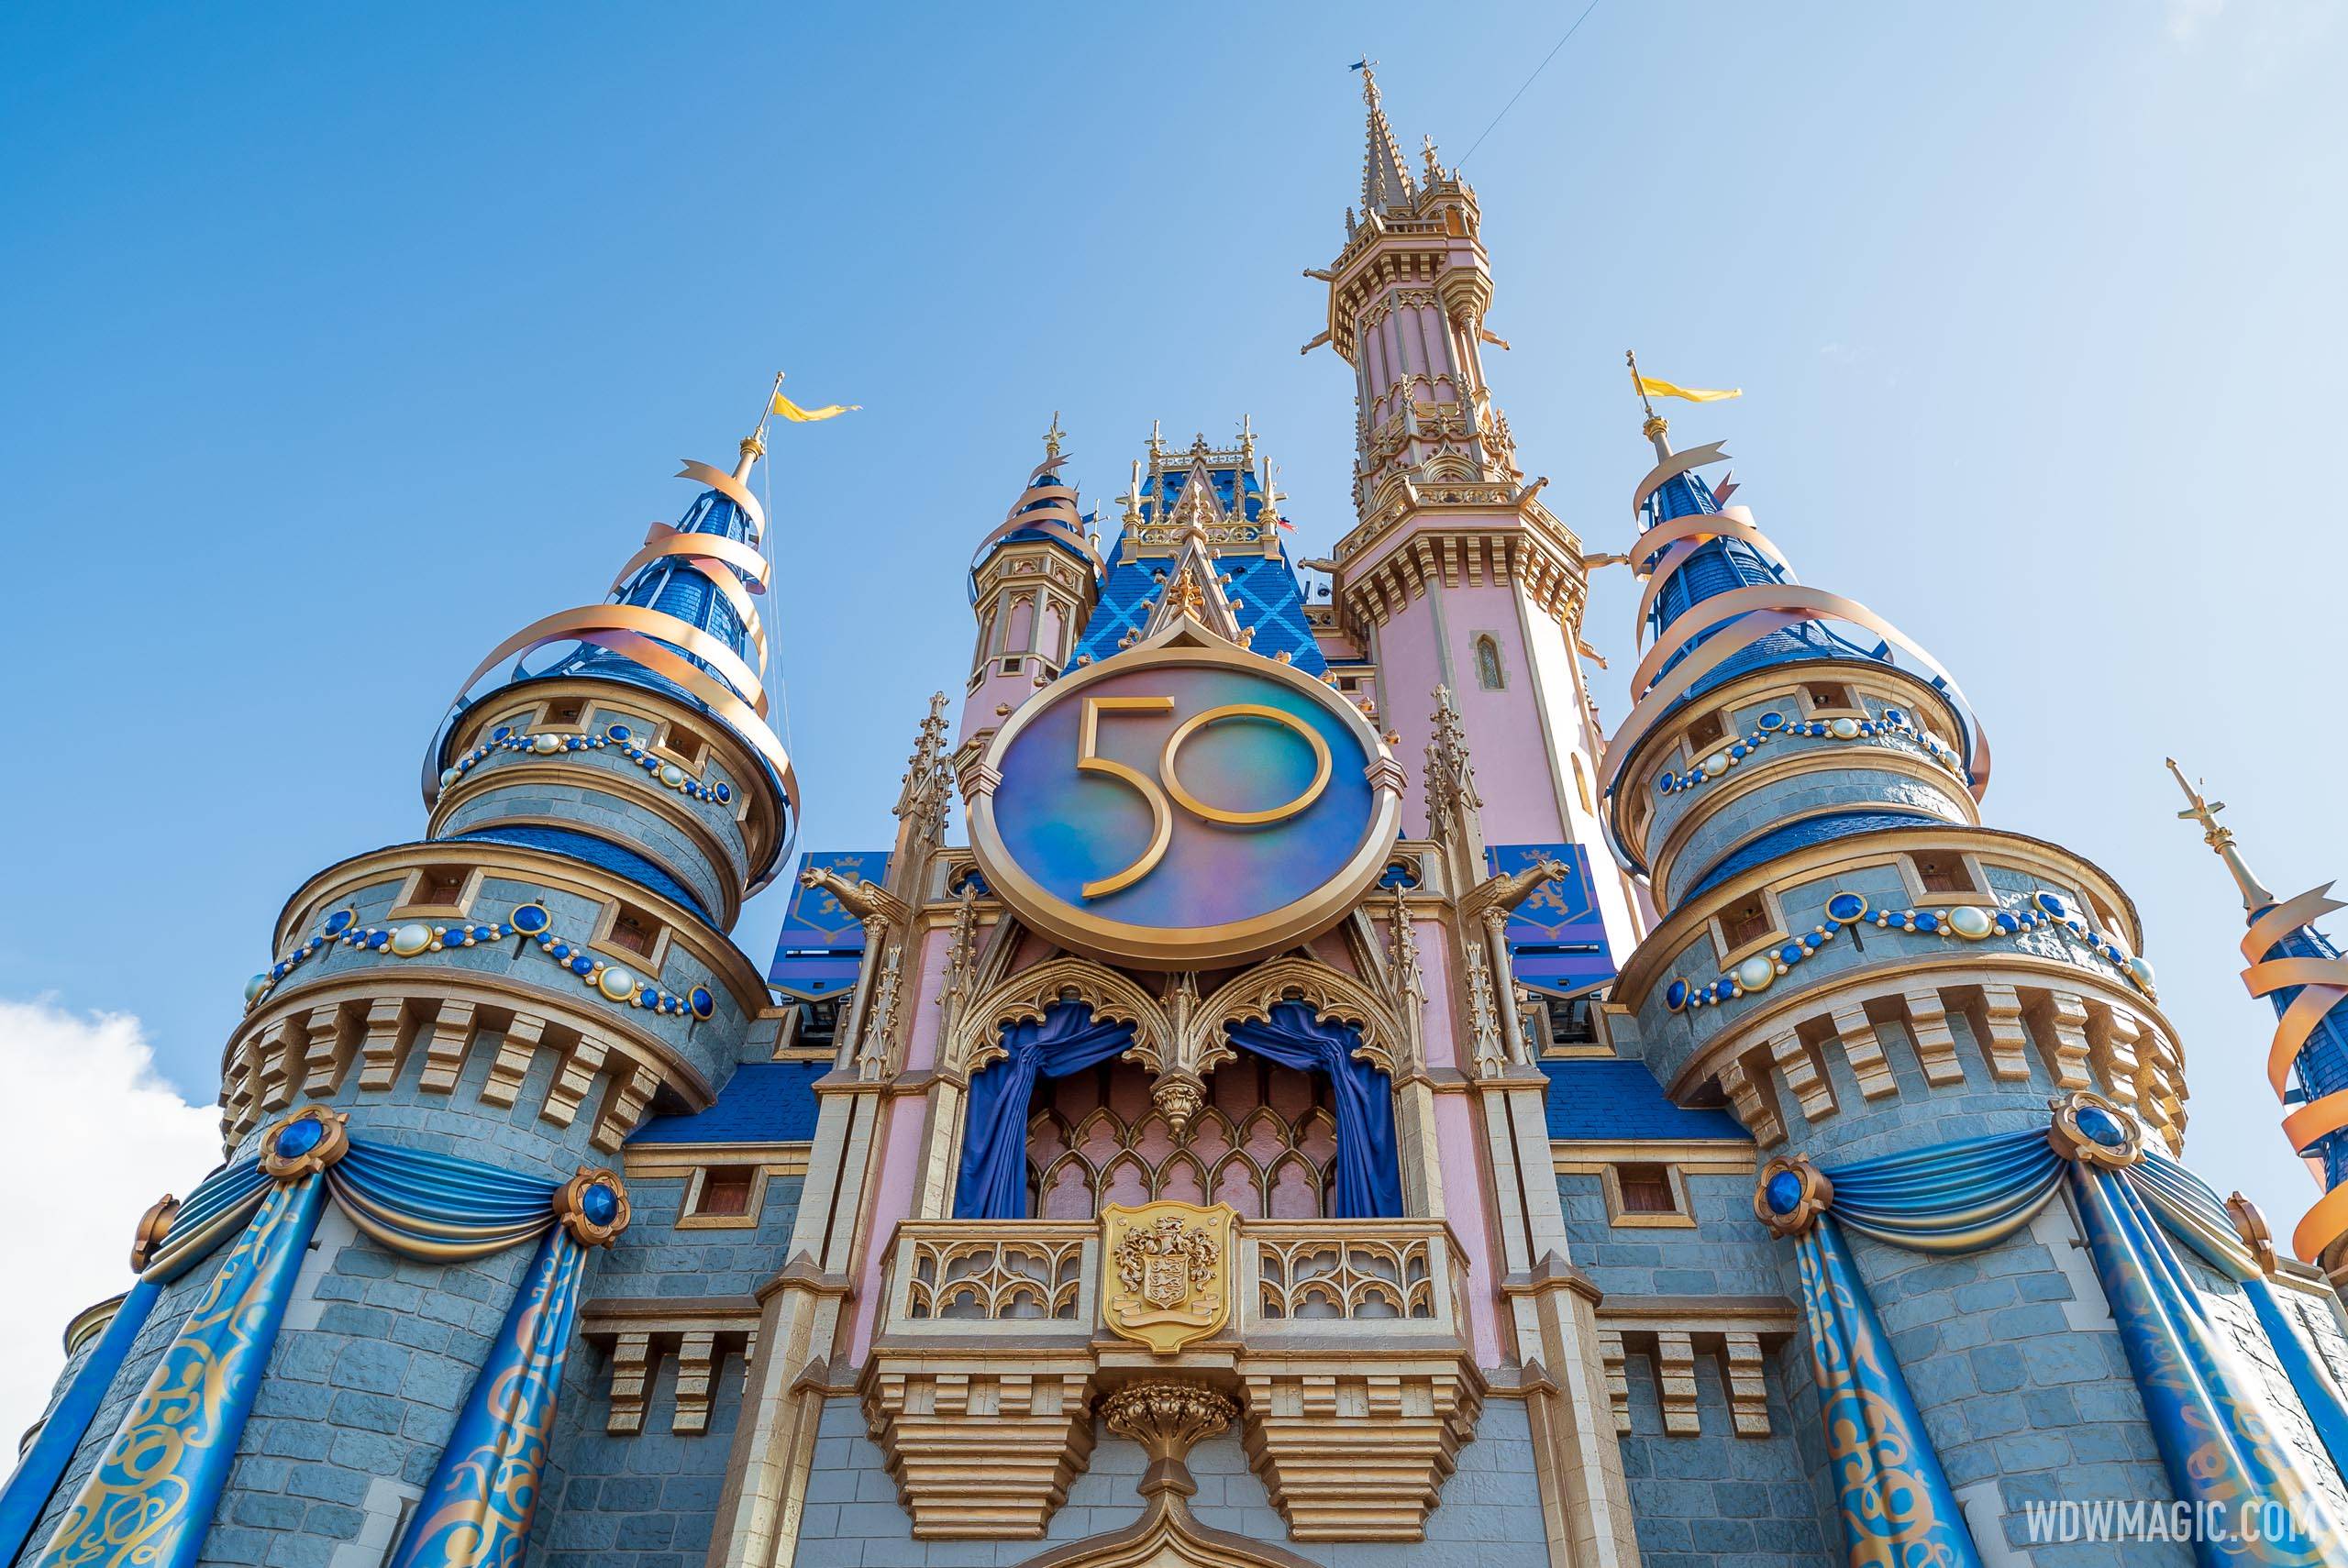 Walt Disney World will soon begin selling new Annual Passes ahead of the 50th anniversary